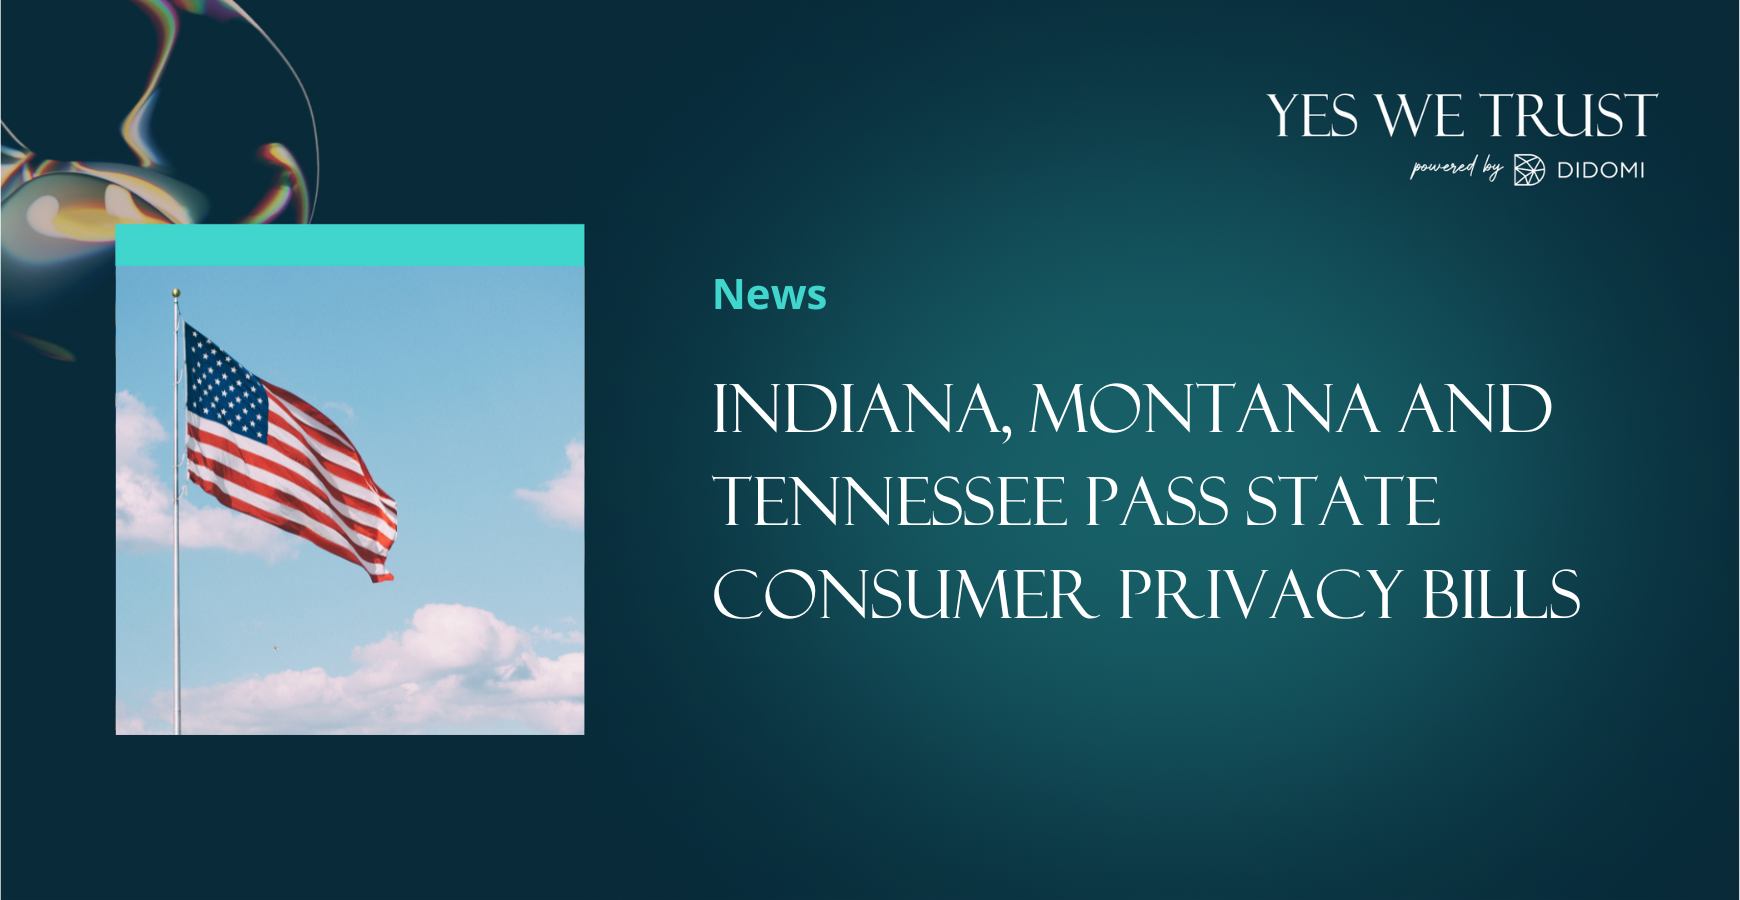 Yes we Trust - Consumer privacy bills in IN, MT and TN